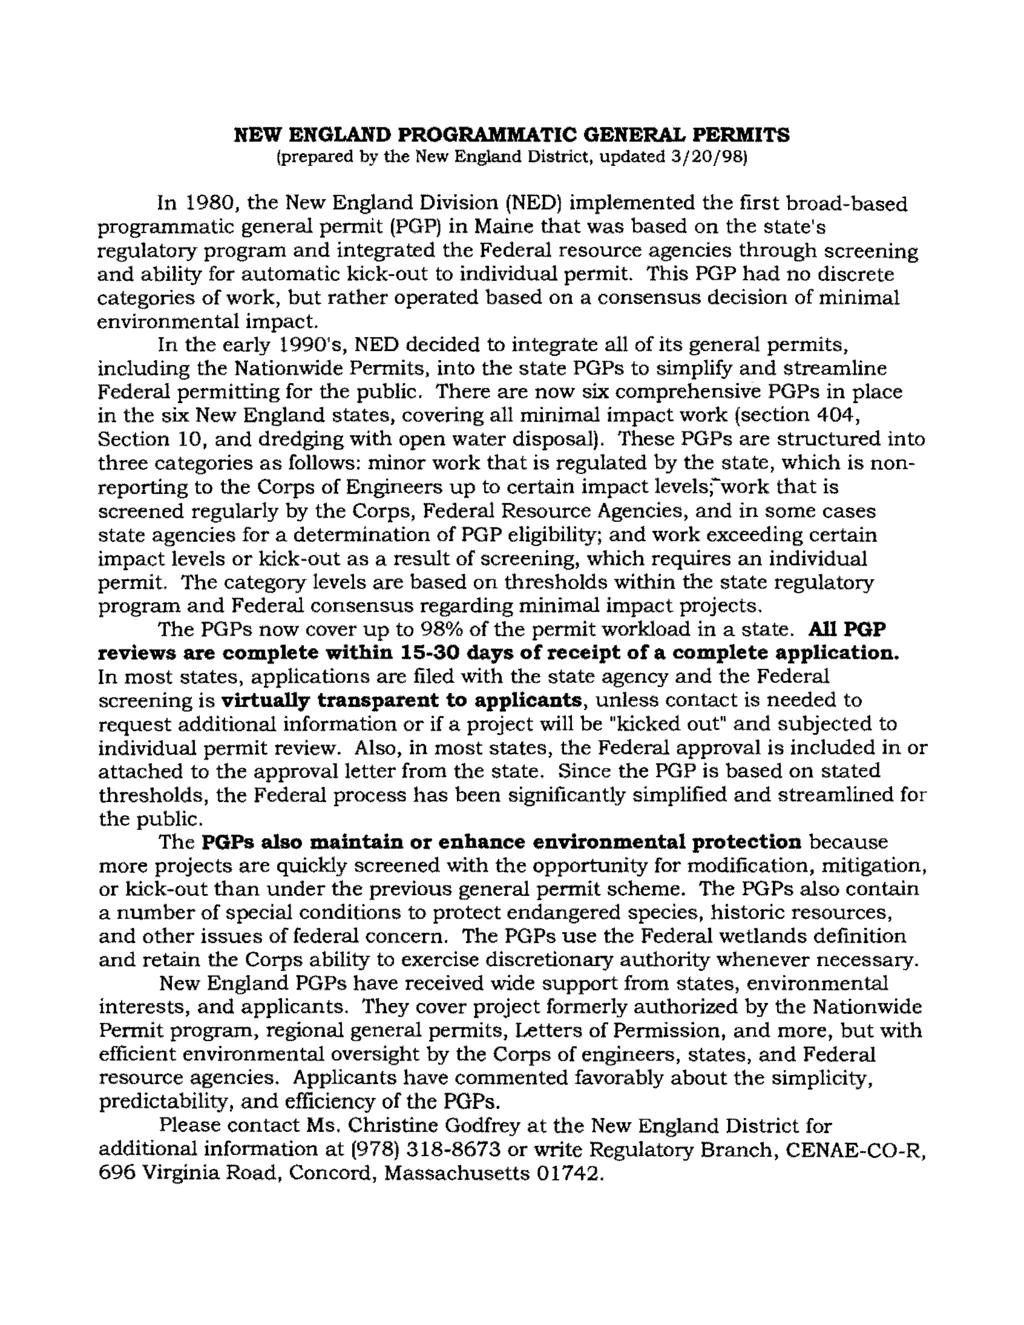 NEW ENGLAND PROGRAMMATIC GENERAL PERMITS (prepared by the New England District, updated 3f20j98) In 1980, the New England Division (NED) implemented the first broad-based programmatic general permit